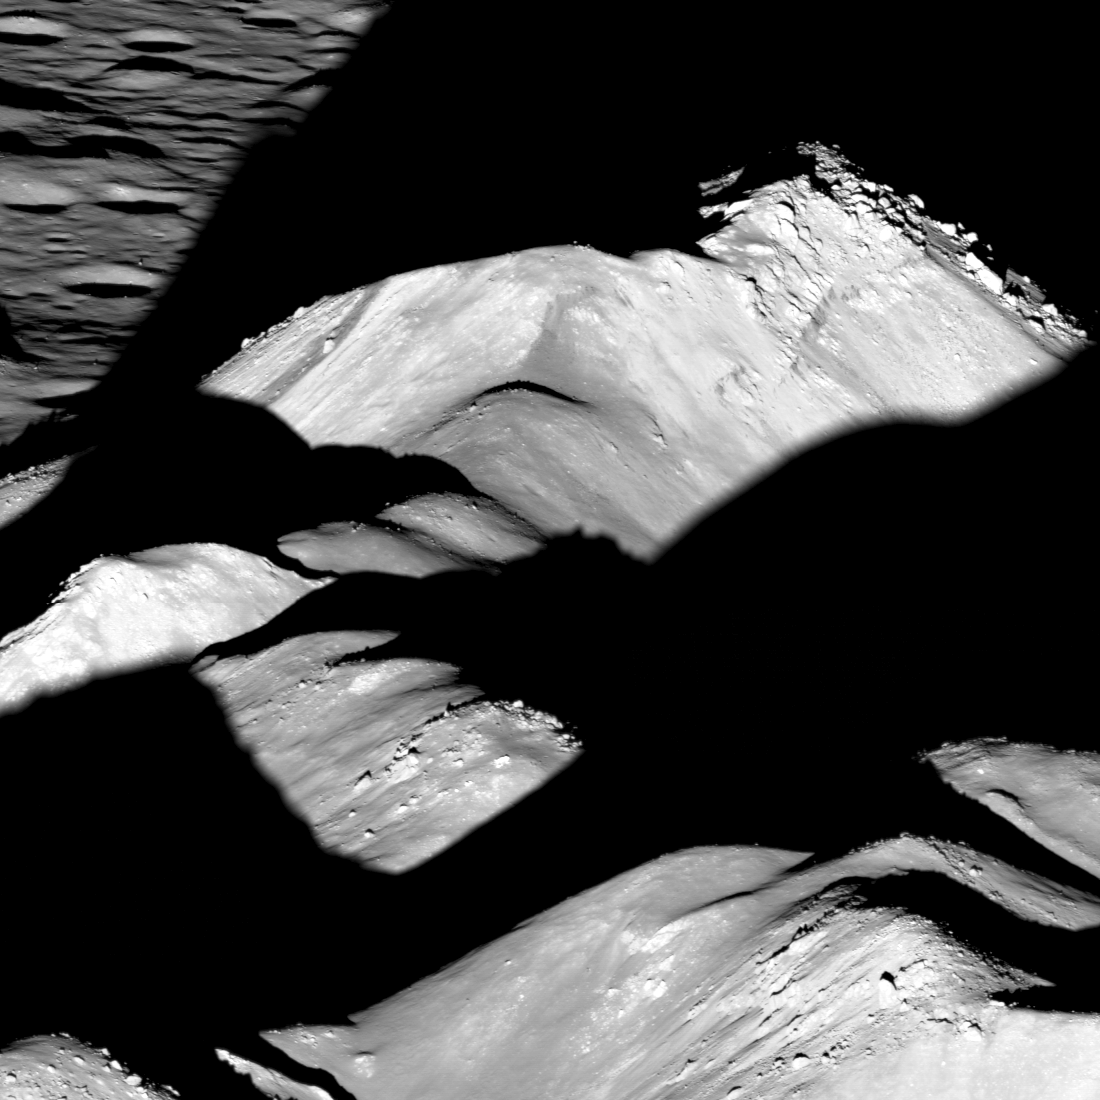 Oblique view of tall, rugged lunar mountains. Bright sunlight casts dramatic shadows between the peaks.